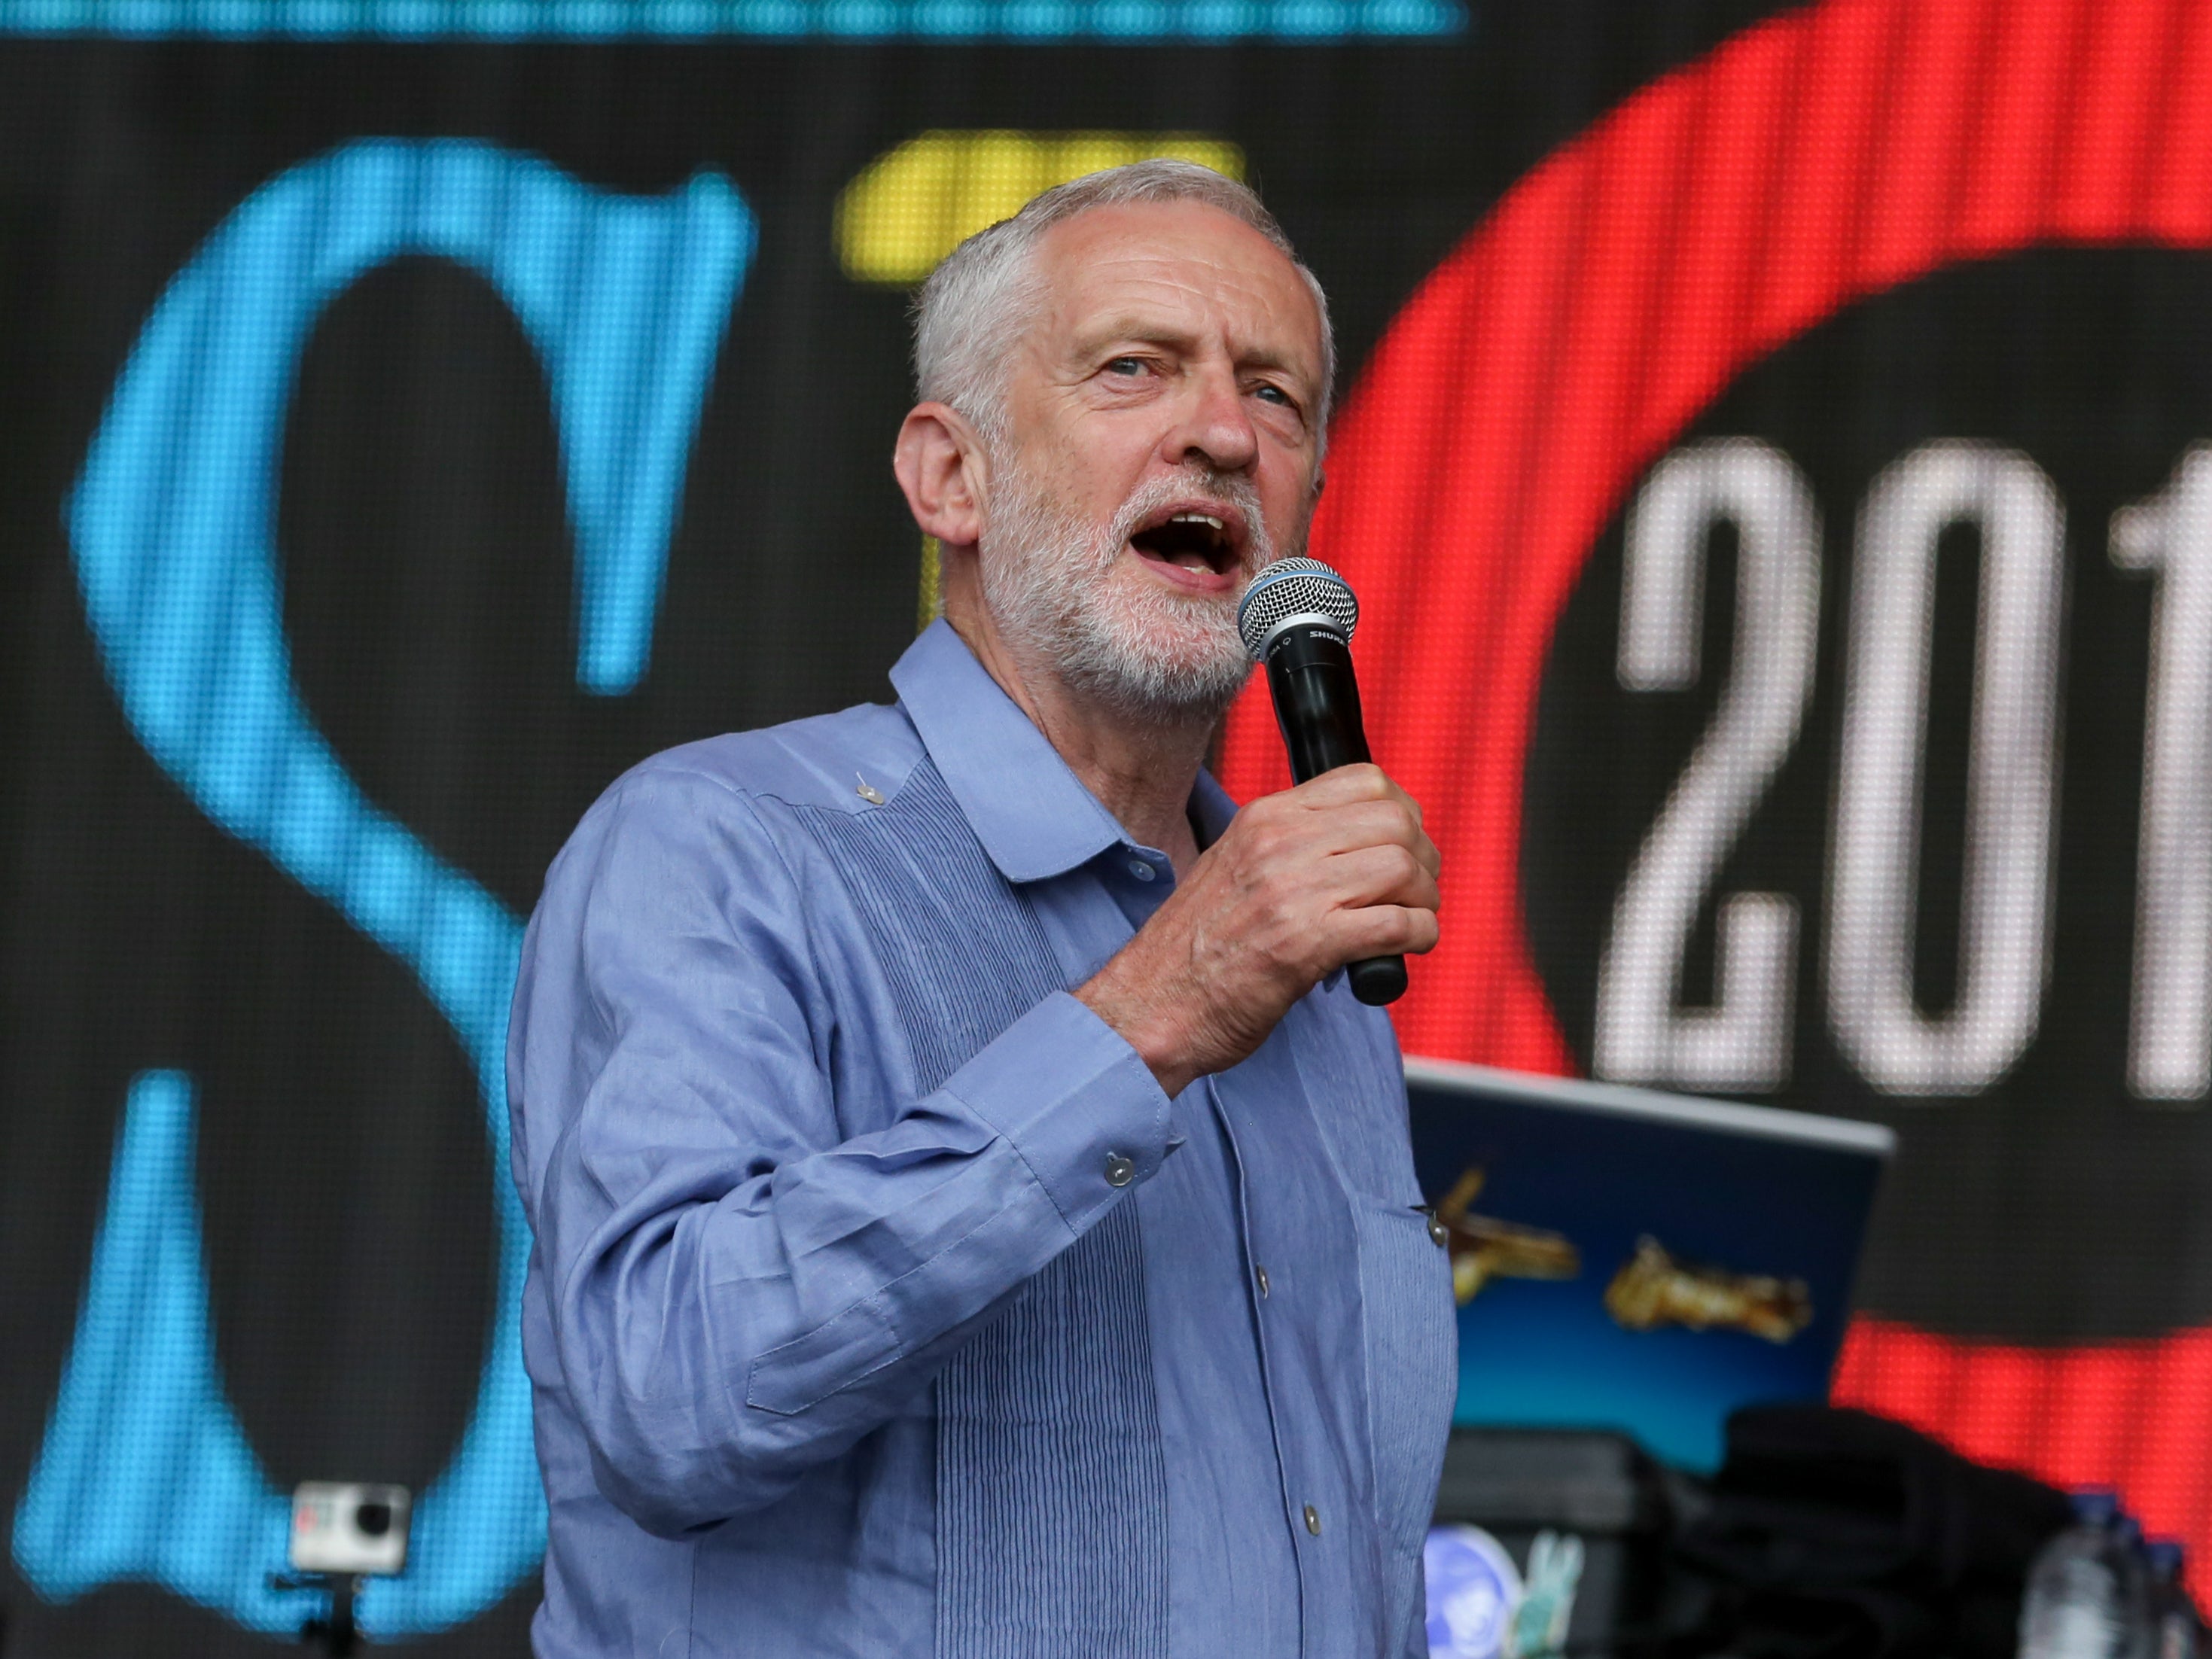 Mr Corbyn’s popularity in the capital would pose a challenge for Labour